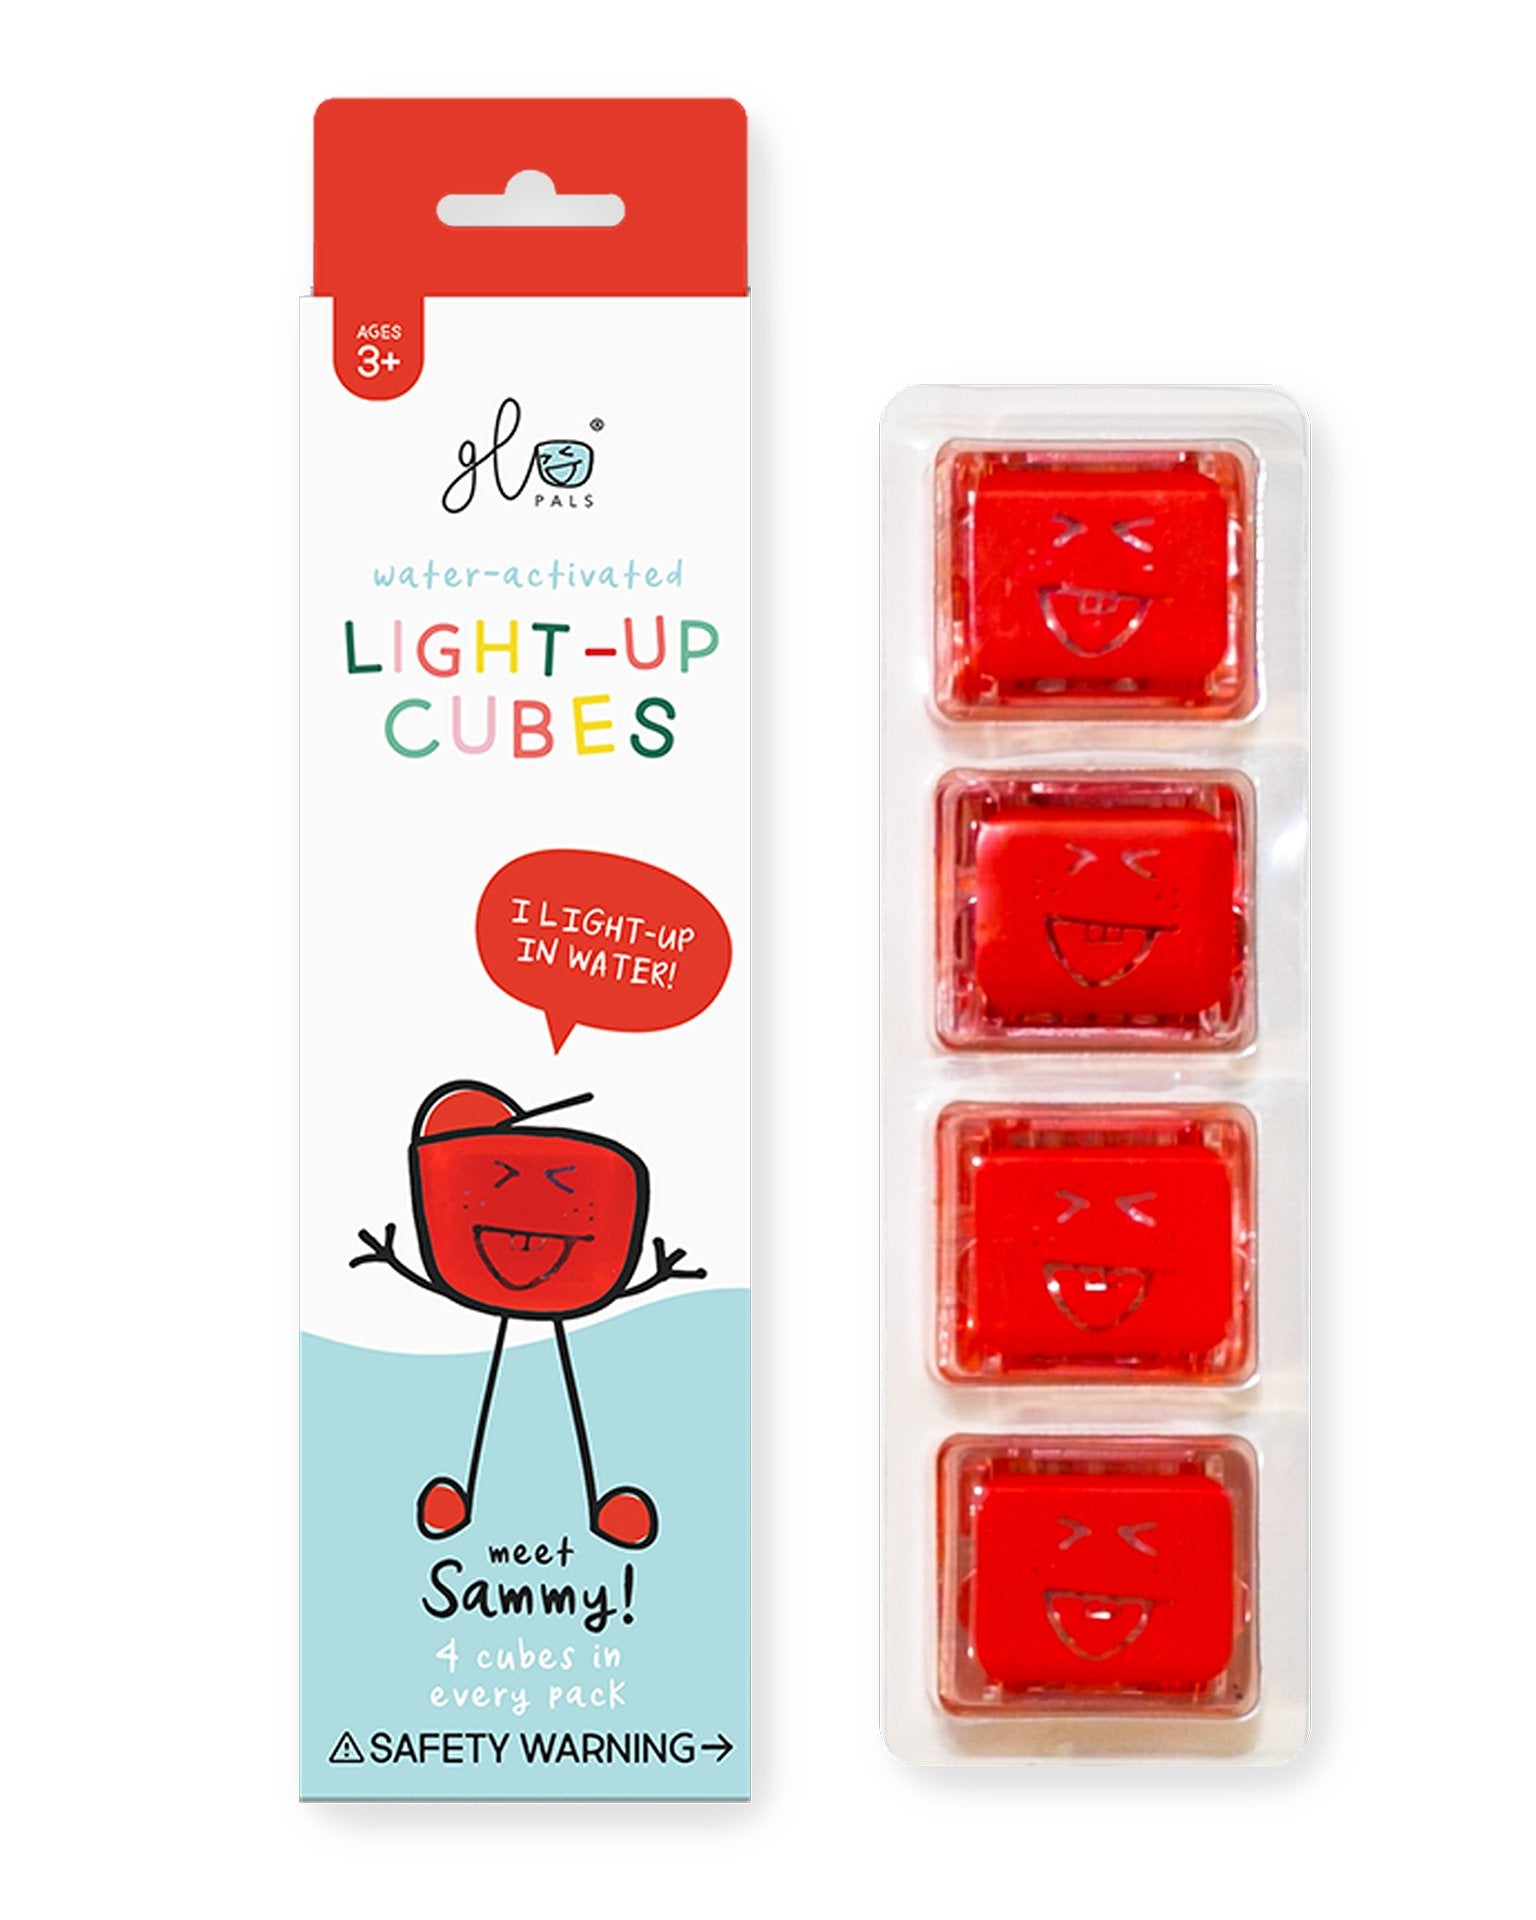 Little glo pals room glo pals red